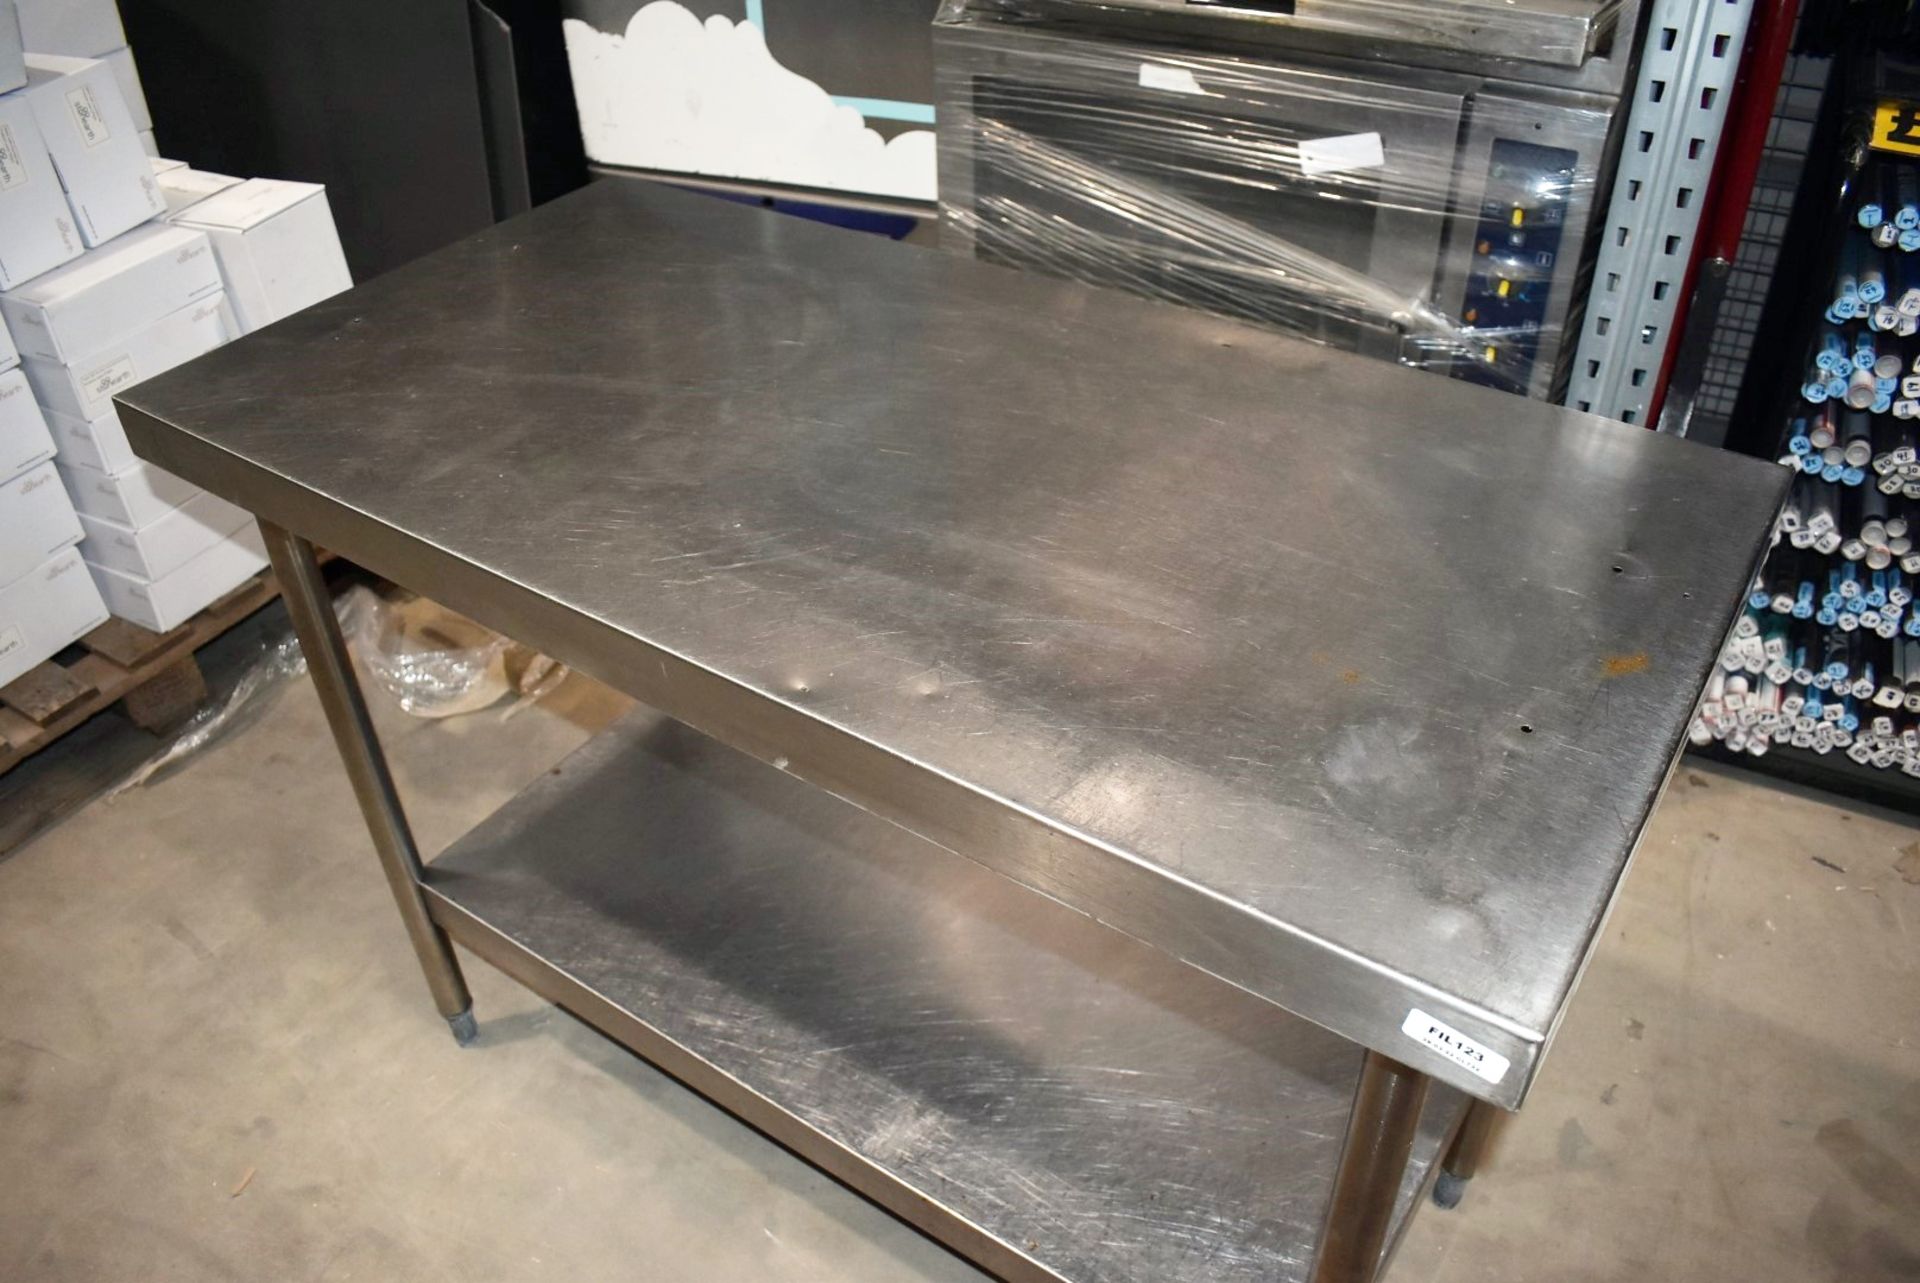 1 x Stainless Steel Prep Table With Undershelf - Dimensions: H90 x D120 x D60 cms - Image 3 of 5